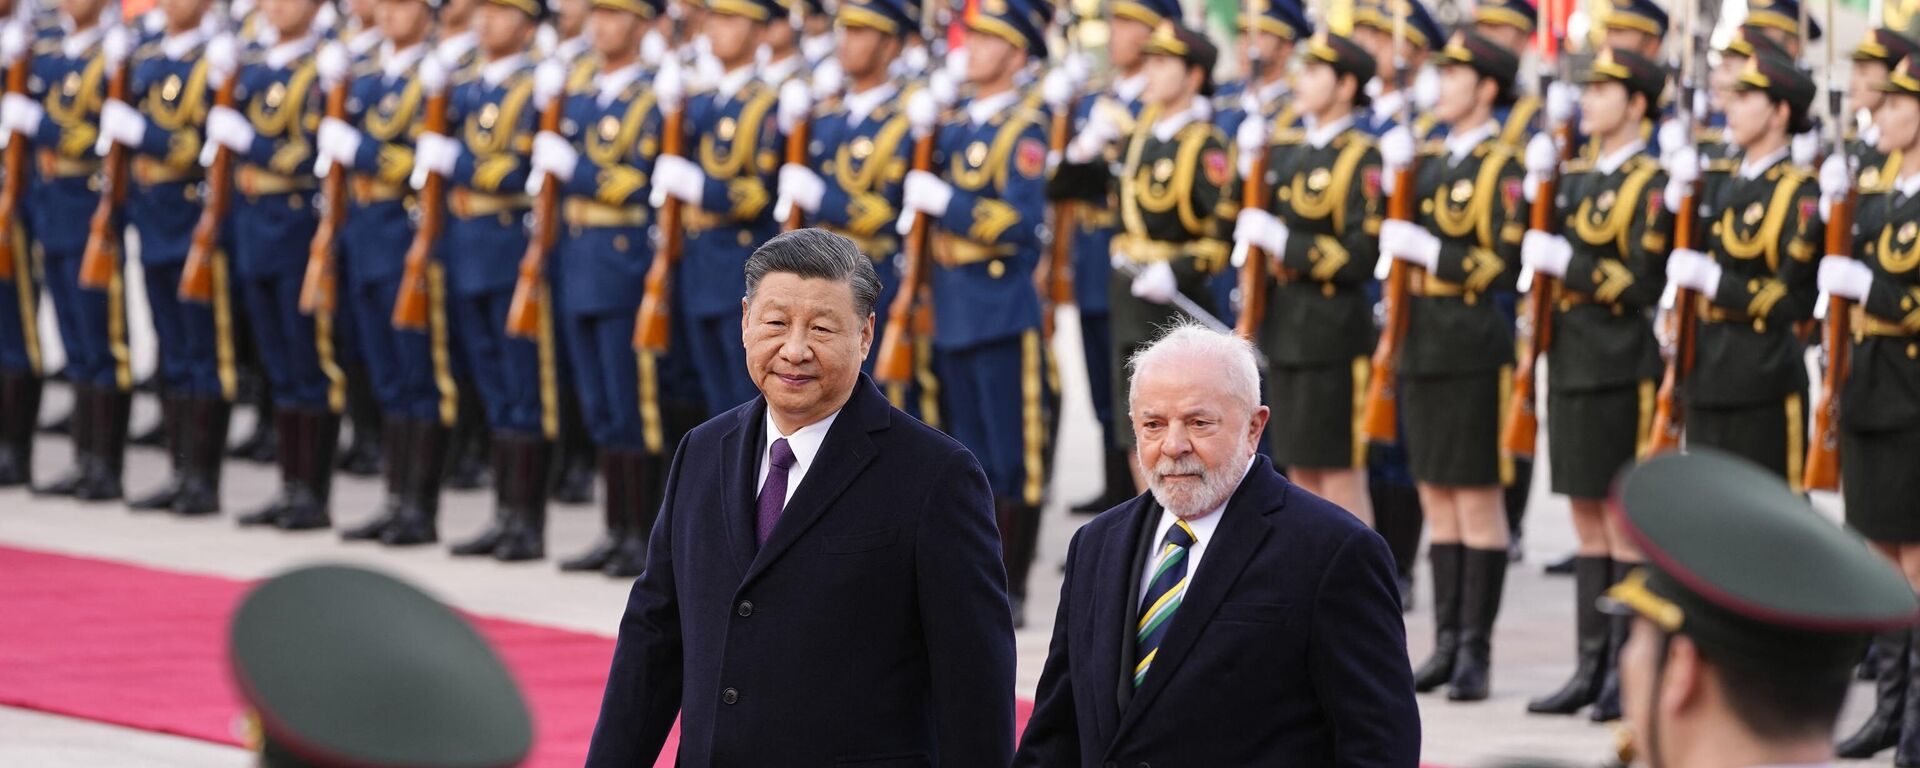 Chinese President Xi Jinping (L) and Brazil's President Luiz Inacio Lula da Silva attend a welcome ceremony at the Great Hall of the People in Beijing on April 14, 2023. - Sputnik International, 1920, 14.04.2023